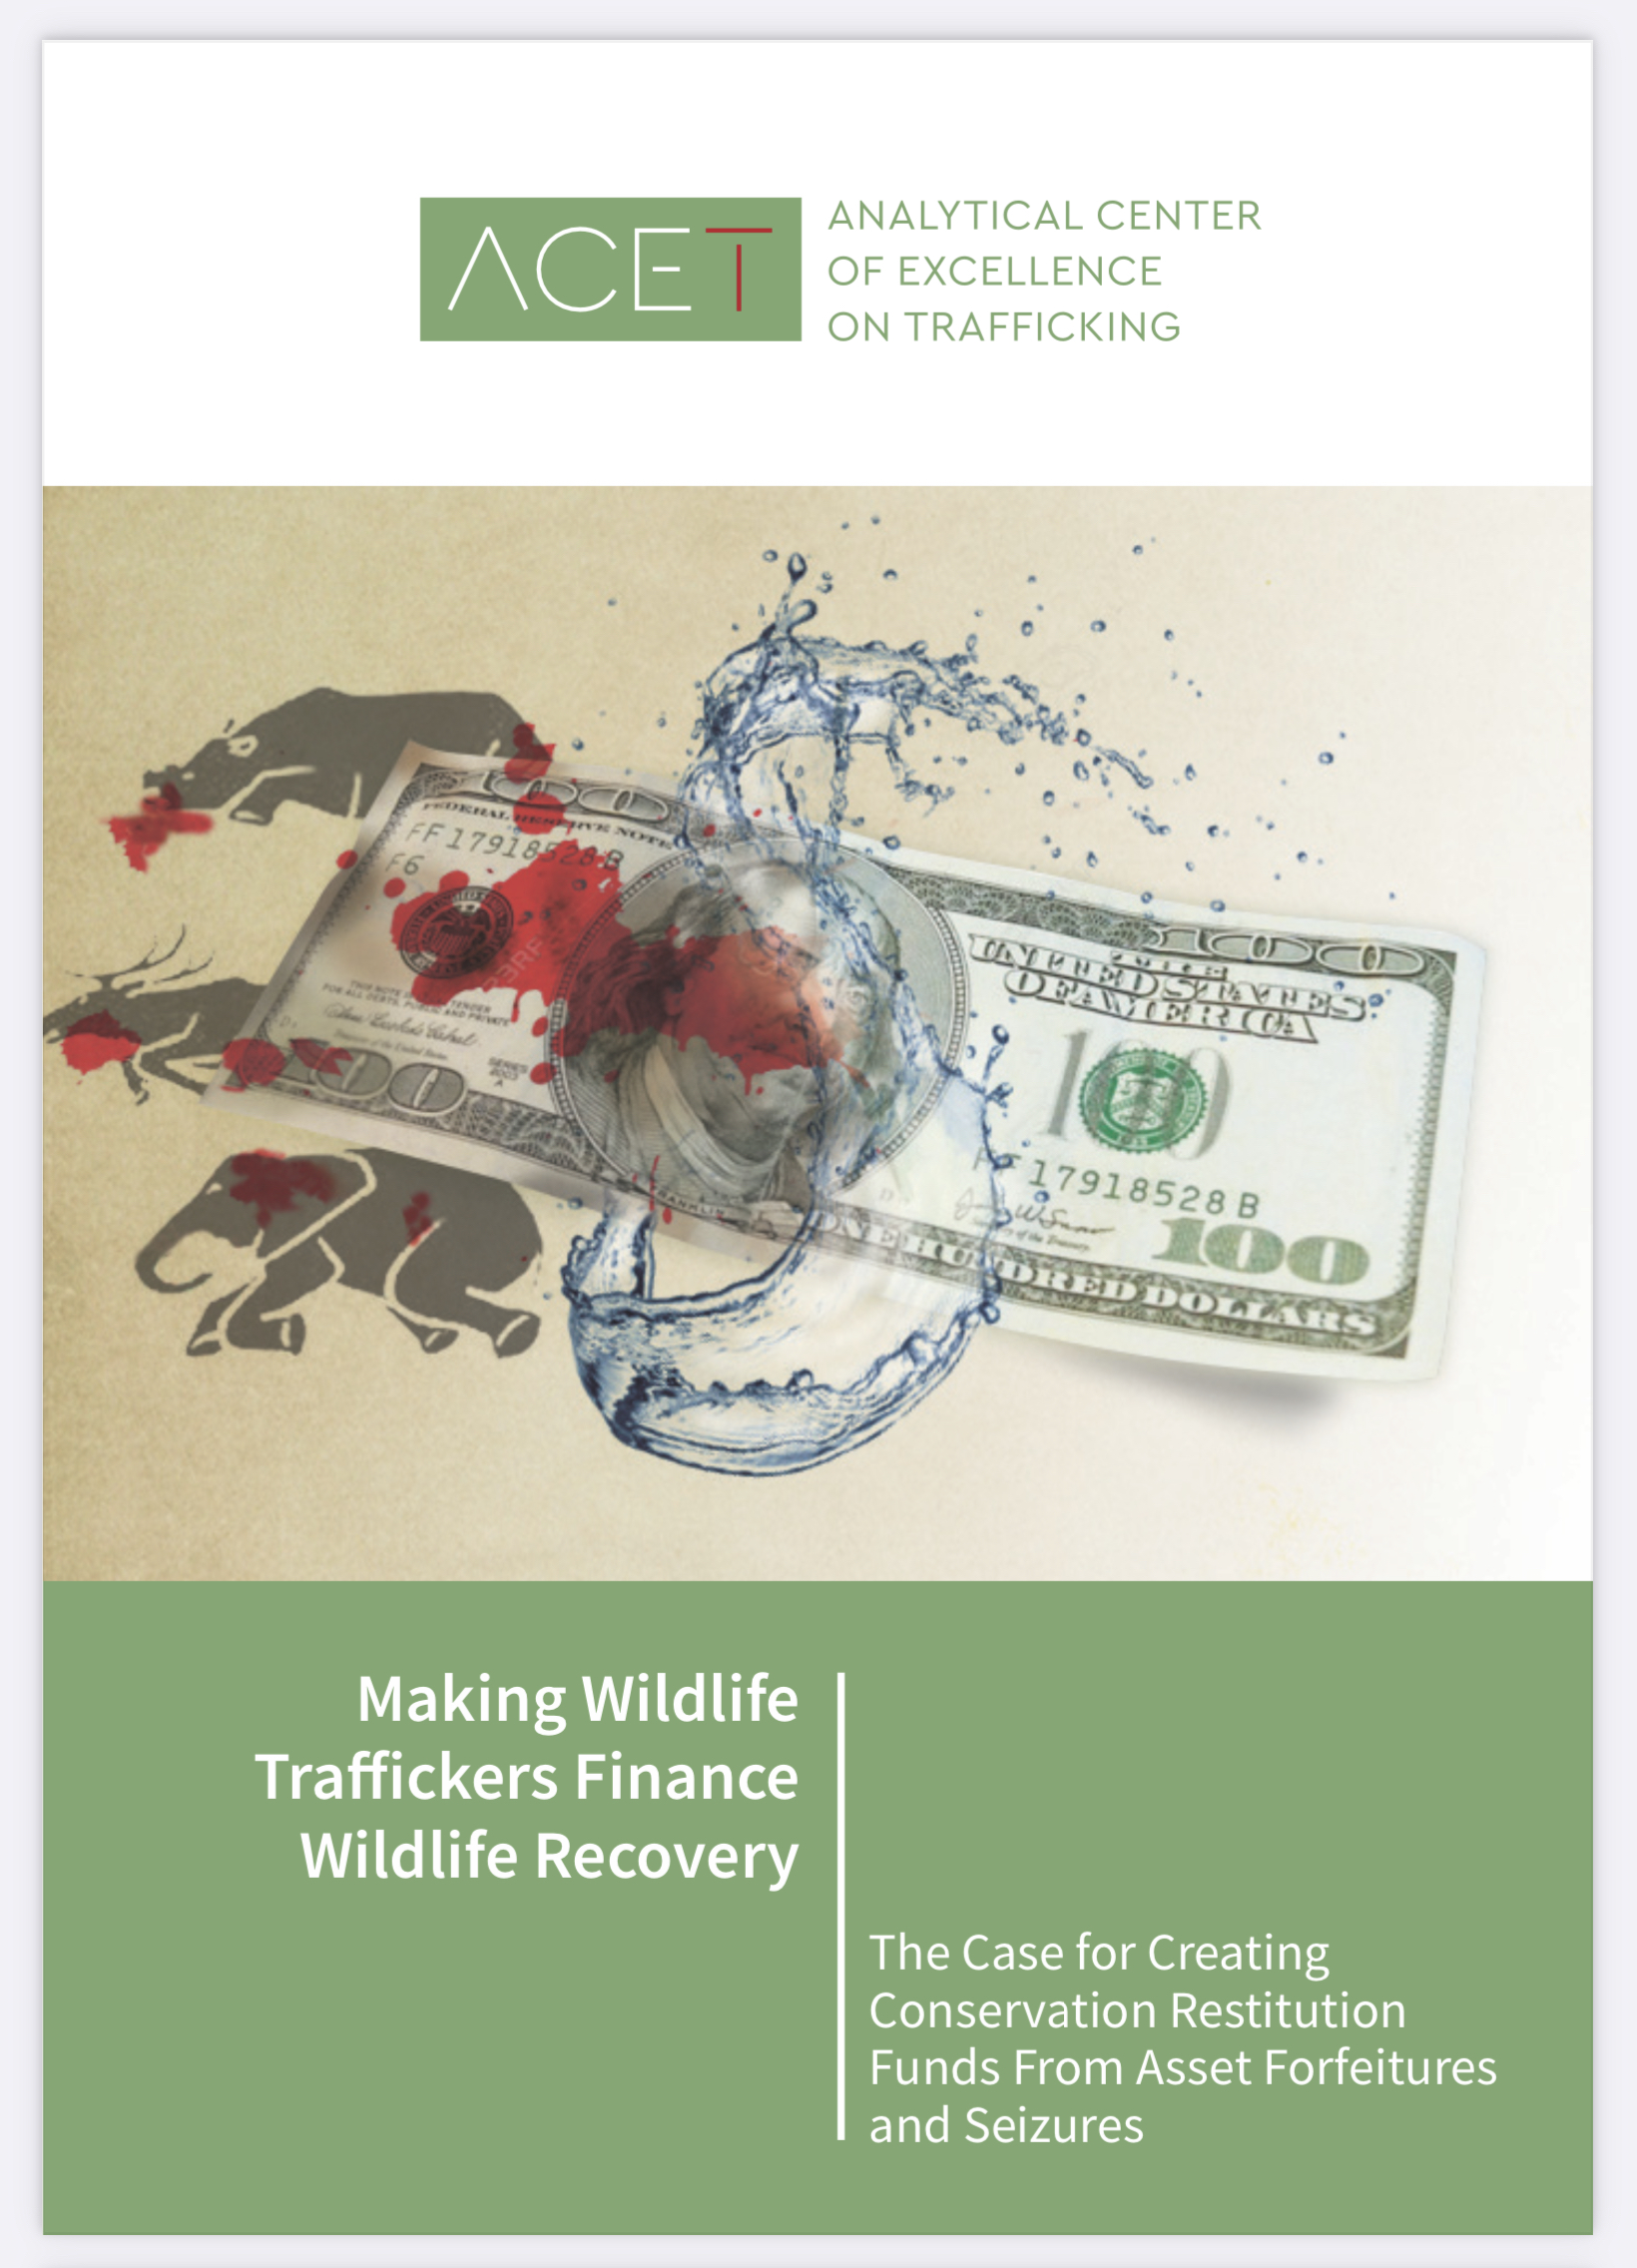 ACET Conservation Restitution cover image